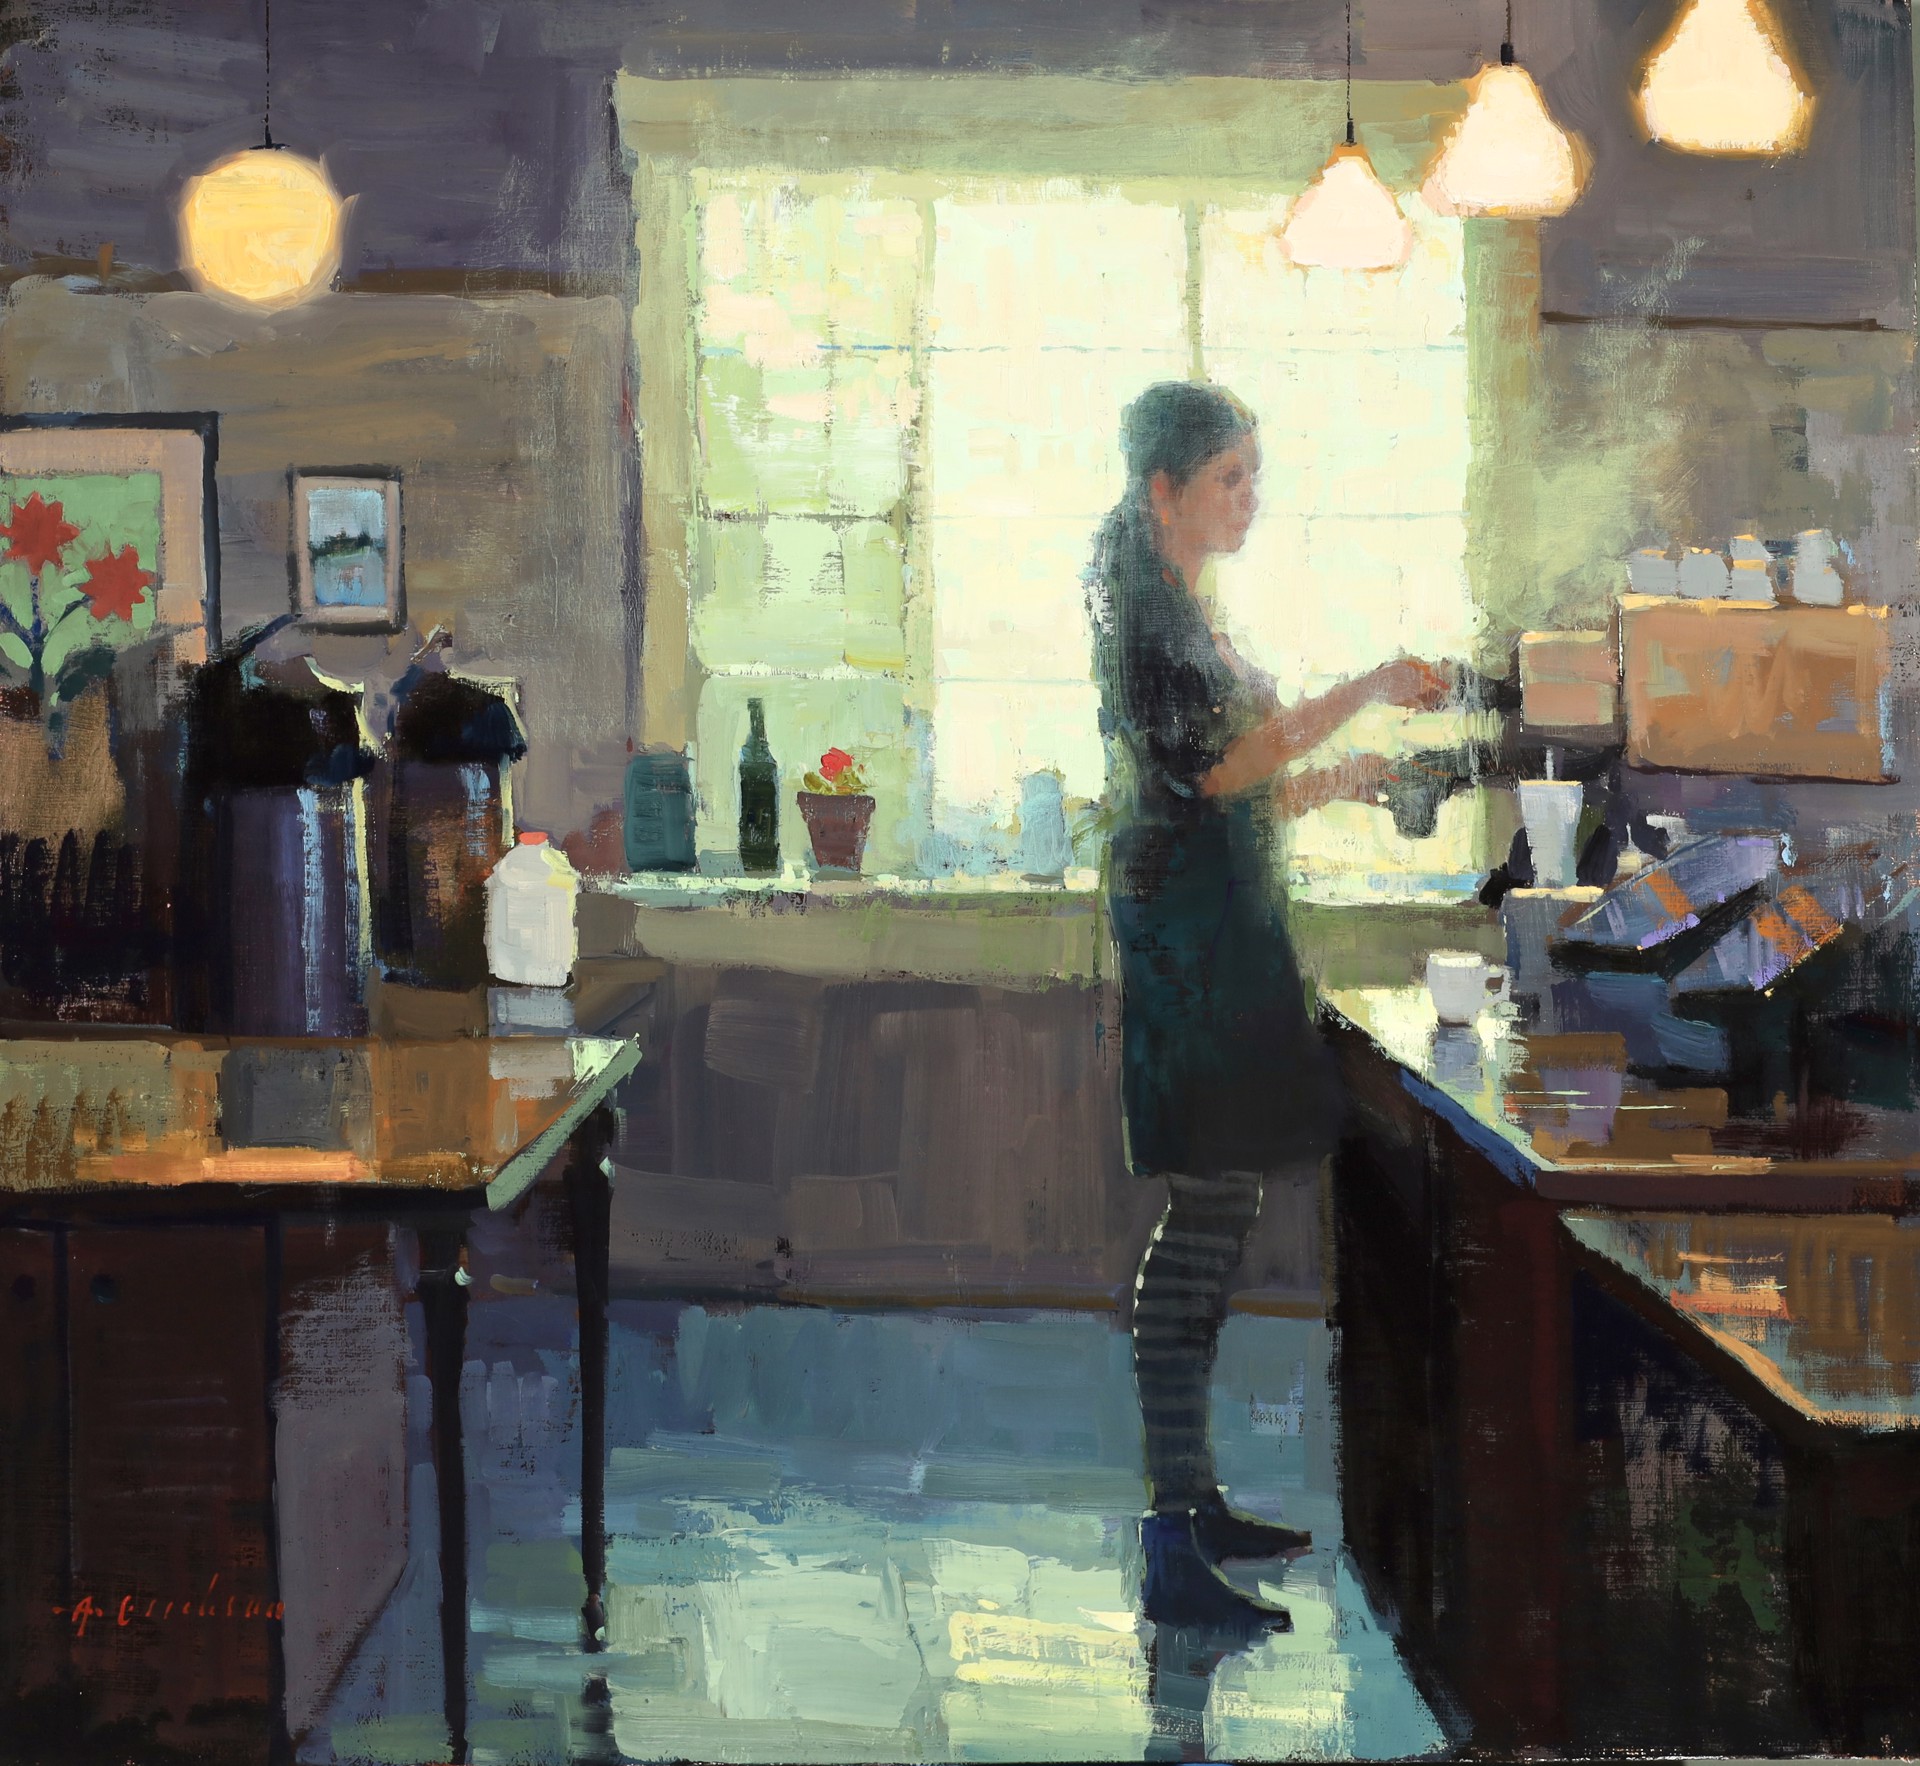 Afternoon at the Interstellar Cafe by Aimee Erickson